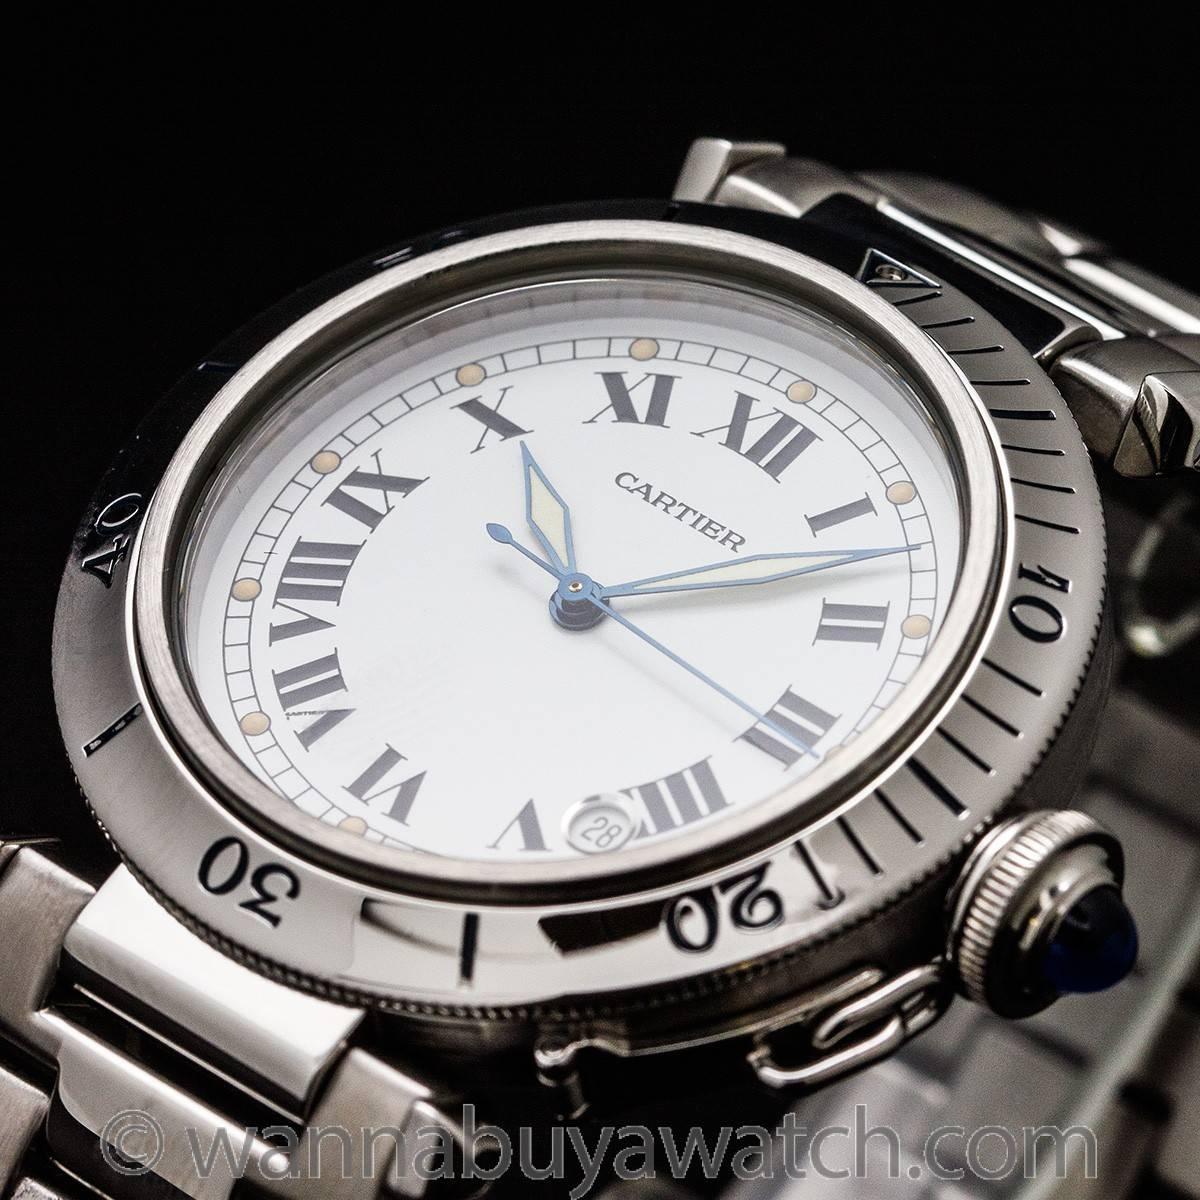 Men's Cartier Stainless Steel White Dial Pasha Automatic Wristwatch